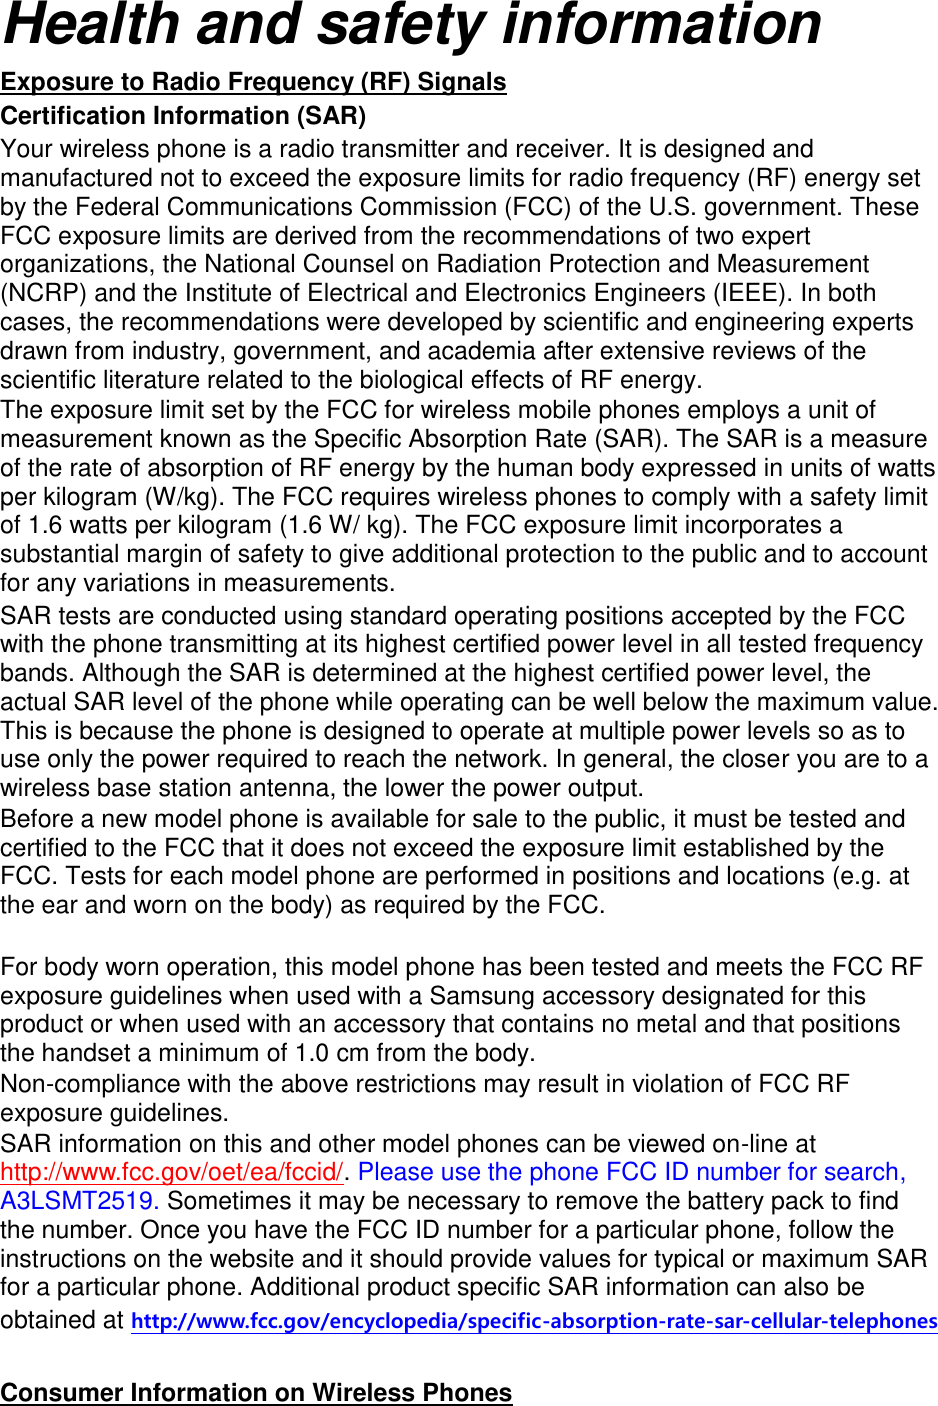 Health and safety information Exposure to Radio Frequency (RF) Signals Certification Information (SAR) Your wireless phone is a radio transmitter and receiver. It is designed and manufactured not to exceed the exposure limits for radio frequency (RF) energy set by the Federal Communications Commission (FCC) of the U.S. government. These FCC exposure limits are derived from the recommendations of two expert organizations, the National Counsel on Radiation Protection and Measurement (NCRP) and the Institute of Electrical and Electronics Engineers (IEEE). In both cases, the recommendations were developed by scientific and engineering experts drawn from industry, government, and academia after extensive reviews of the scientific literature related to the biological effects of RF energy. The exposure limit set by the FCC for wireless mobile phones employs a unit of measurement known as the Specific Absorption Rate (SAR). The SAR is a measure of the rate of absorption of RF energy by the human body expressed in units of watts per kilogram (W/kg). The FCC requires wireless phones to comply with a safety limit of 1.6 watts per kilogram (1.6 W/ kg). The FCC exposure limit incorporates a substantial margin of safety to give additional protection to the public and to account for any variations in measurements. SAR tests are conducted using standard operating positions accepted by the FCC with the phone transmitting at its highest certified power level in all tested frequency bands. Although the SAR is determined at the highest certified power level, the actual SAR level of the phone while operating can be well below the maximum value. This is because the phone is designed to operate at multiple power levels so as to use only the power required to reach the network. In general, the closer you are to a wireless base station antenna, the lower the power output. Before a new model phone is available for sale to the public, it must be tested and certified to the FCC that it does not exceed the exposure limit established by the FCC. Tests for each model phone are performed in positions and locations (e.g. at the ear and worn on the body) as required by the FCC.      For body worn operation, this model phone has been tested and meets the FCC RF exposure guidelines when used with a Samsung accessory designated for this product or when used with an accessory that contains no metal and that positions the handset a minimum of 1.0 cm from the body.   Non-compliance with the above restrictions may result in violation of FCC RF exposure guidelines. SAR information on this and other model phones can be viewed on-line at http://www.fcc.gov/oet/ea/fccid/. Please use the phone FCC ID number for search, A3LSMT2519. Sometimes it may be necessary to remove the battery pack to find the number. Once you have the FCC ID number for a particular phone, follow the instructions on the website and it should provide values for typical or maximum SAR for a particular phone. Additional product specific SAR information can also be obtained at http://www.fcc.gov/encyclopedia/specific-absorption-rate-sar-cellular-telephones  Consumer Information on Wireless Phones 